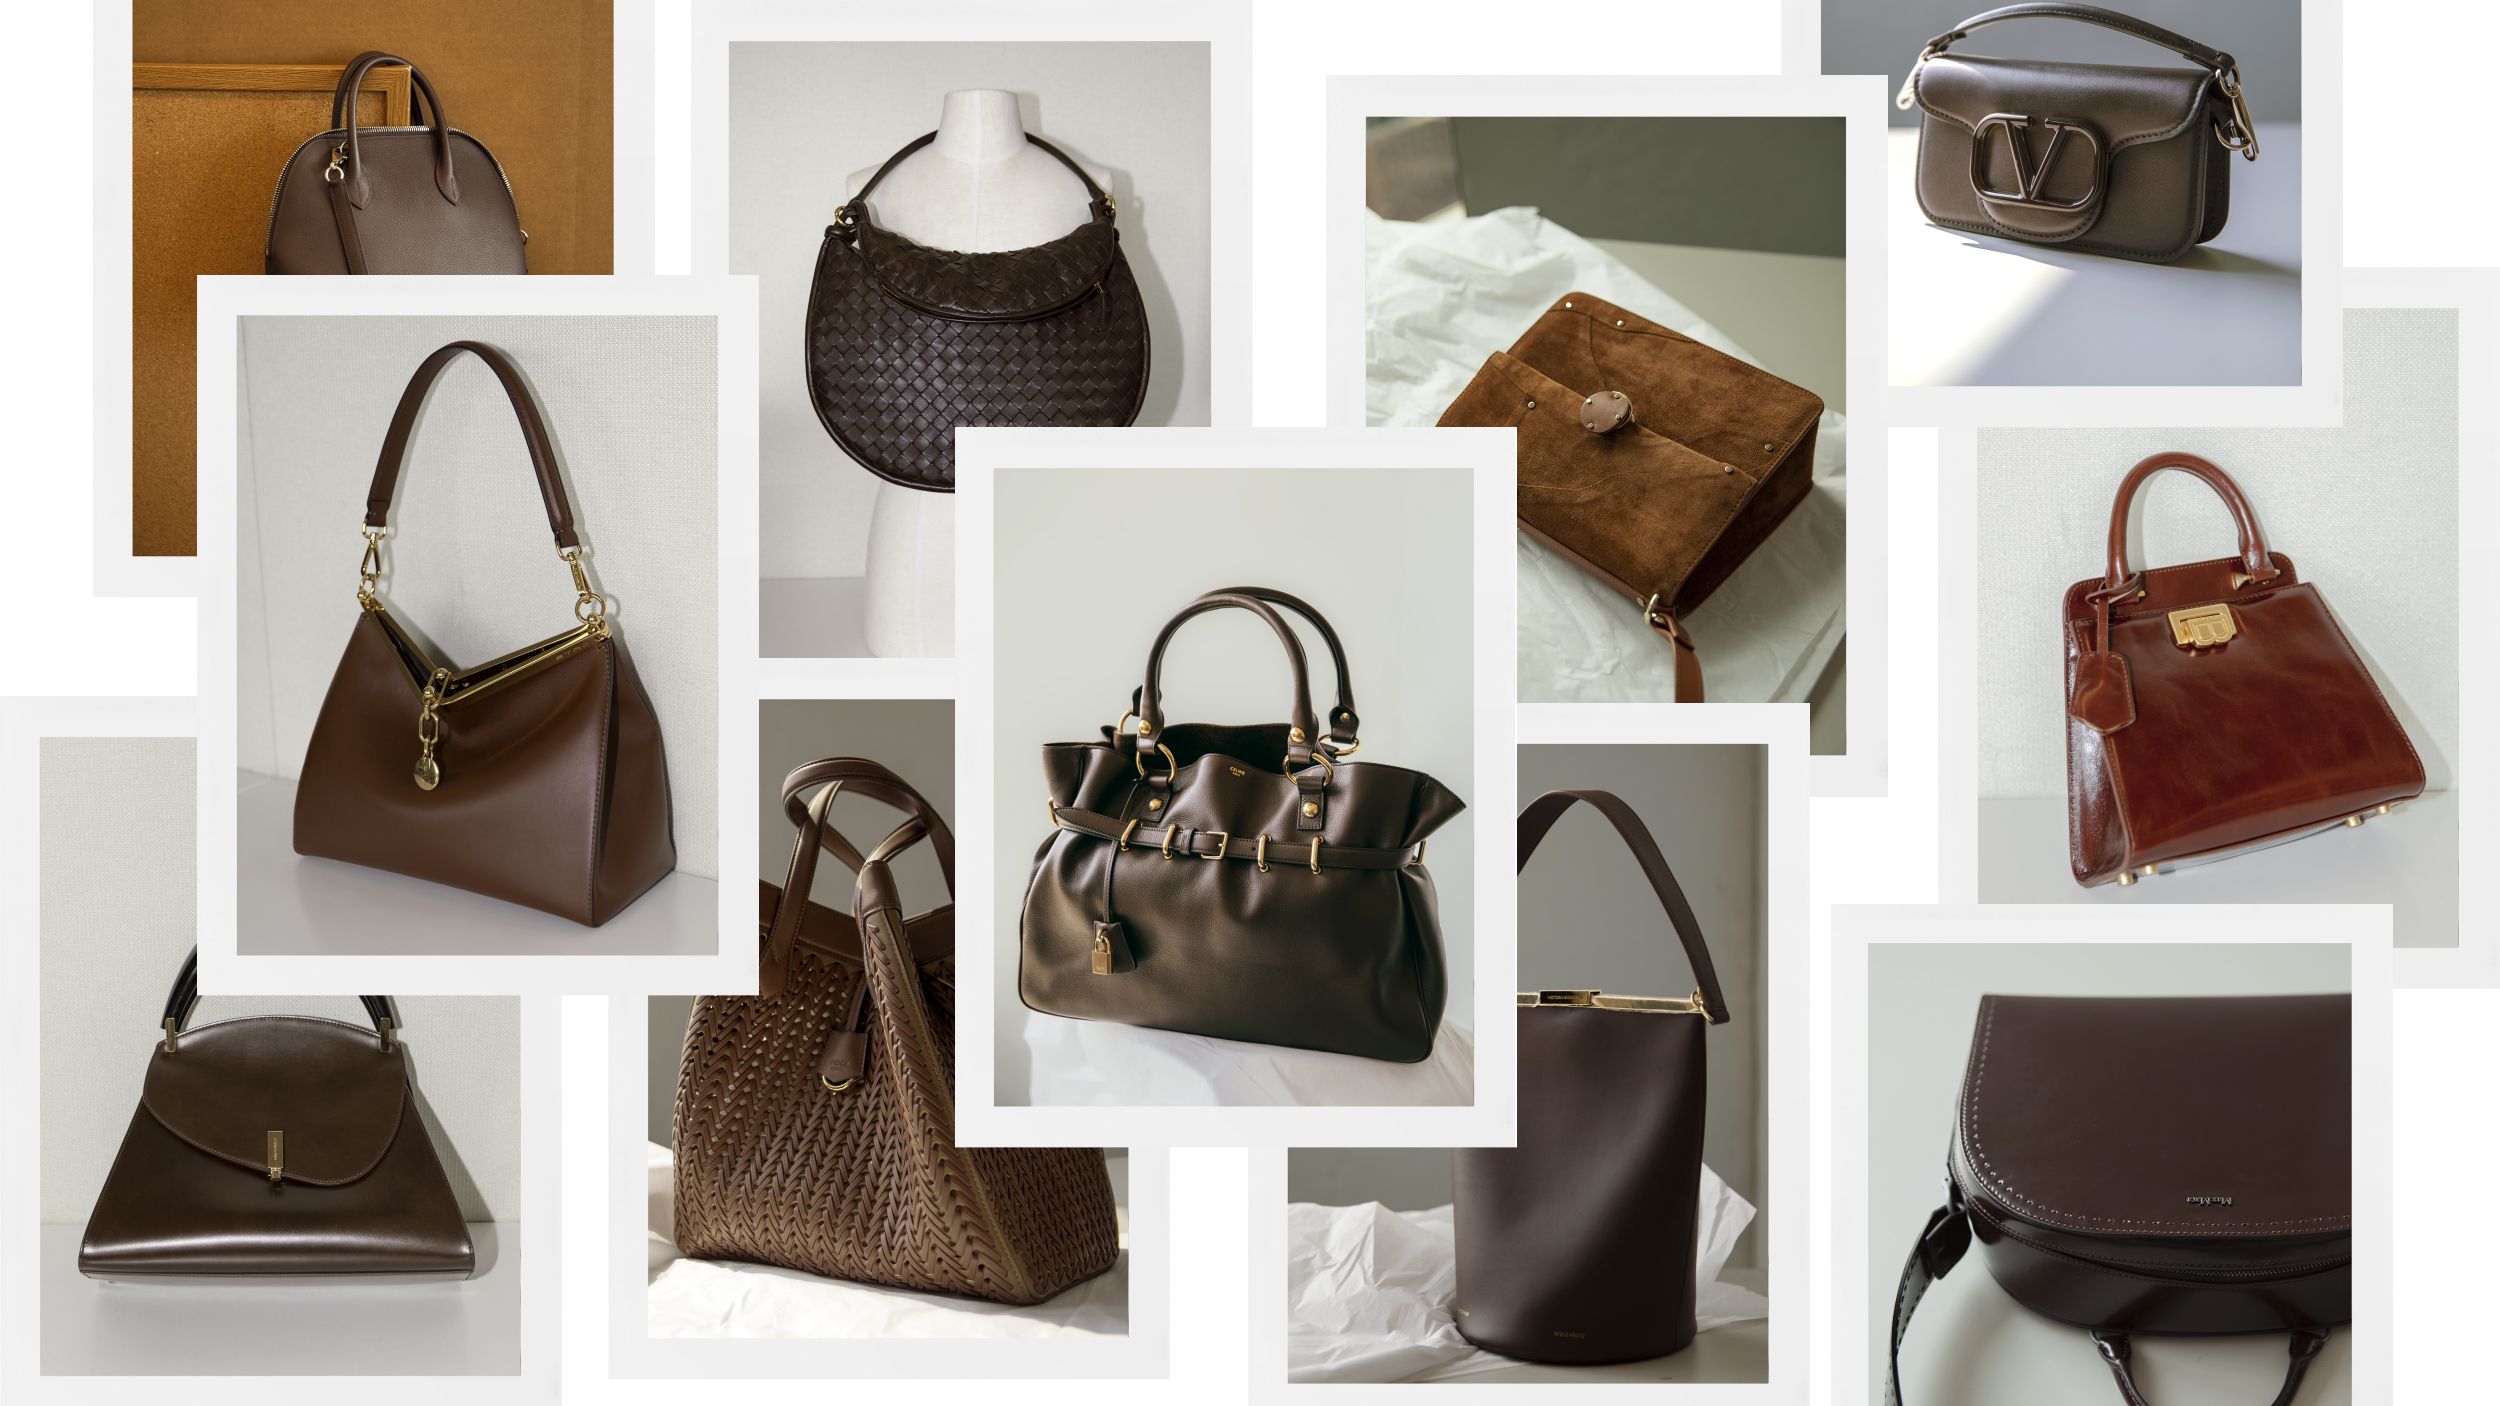 pictures of different types of bags - Google Search | Types of bag, Trapeze  bag, Purses and handbags